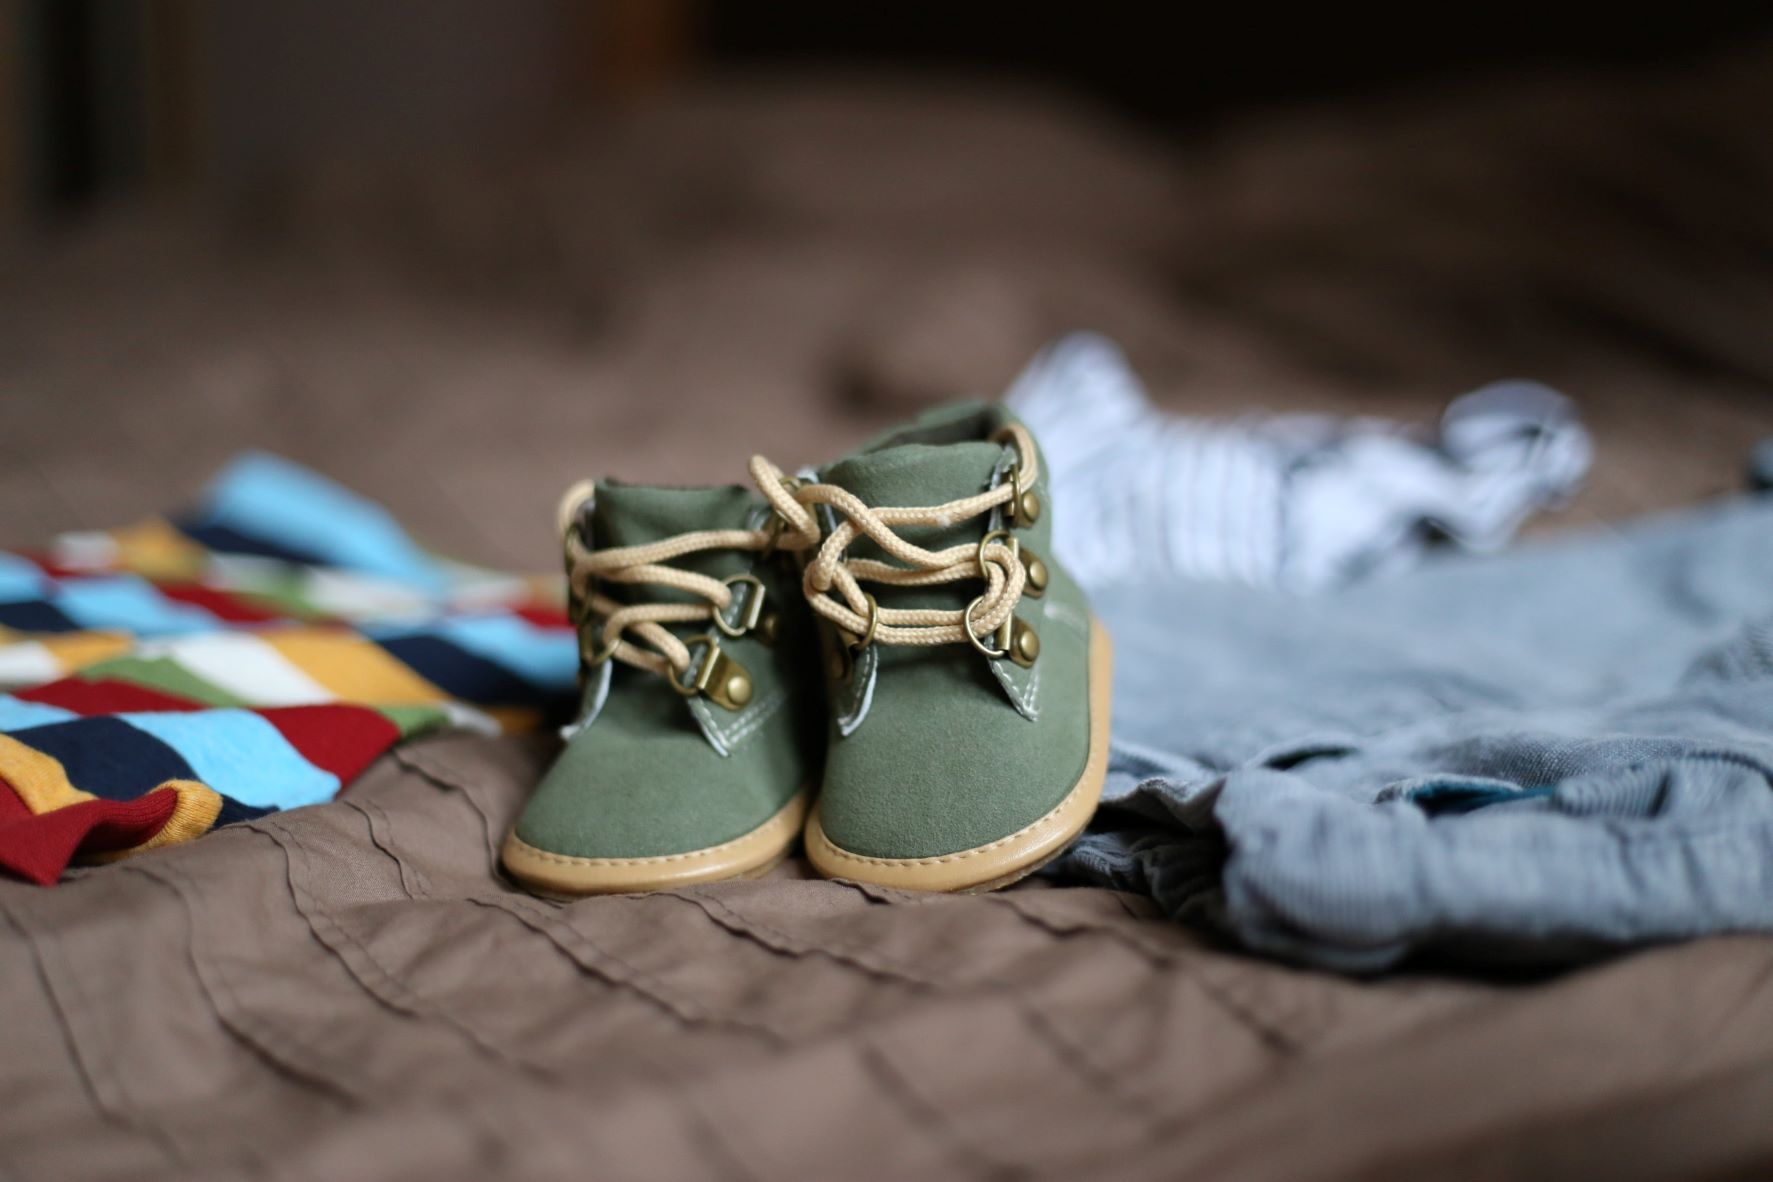 Which type of footwear is comfortable for kids?